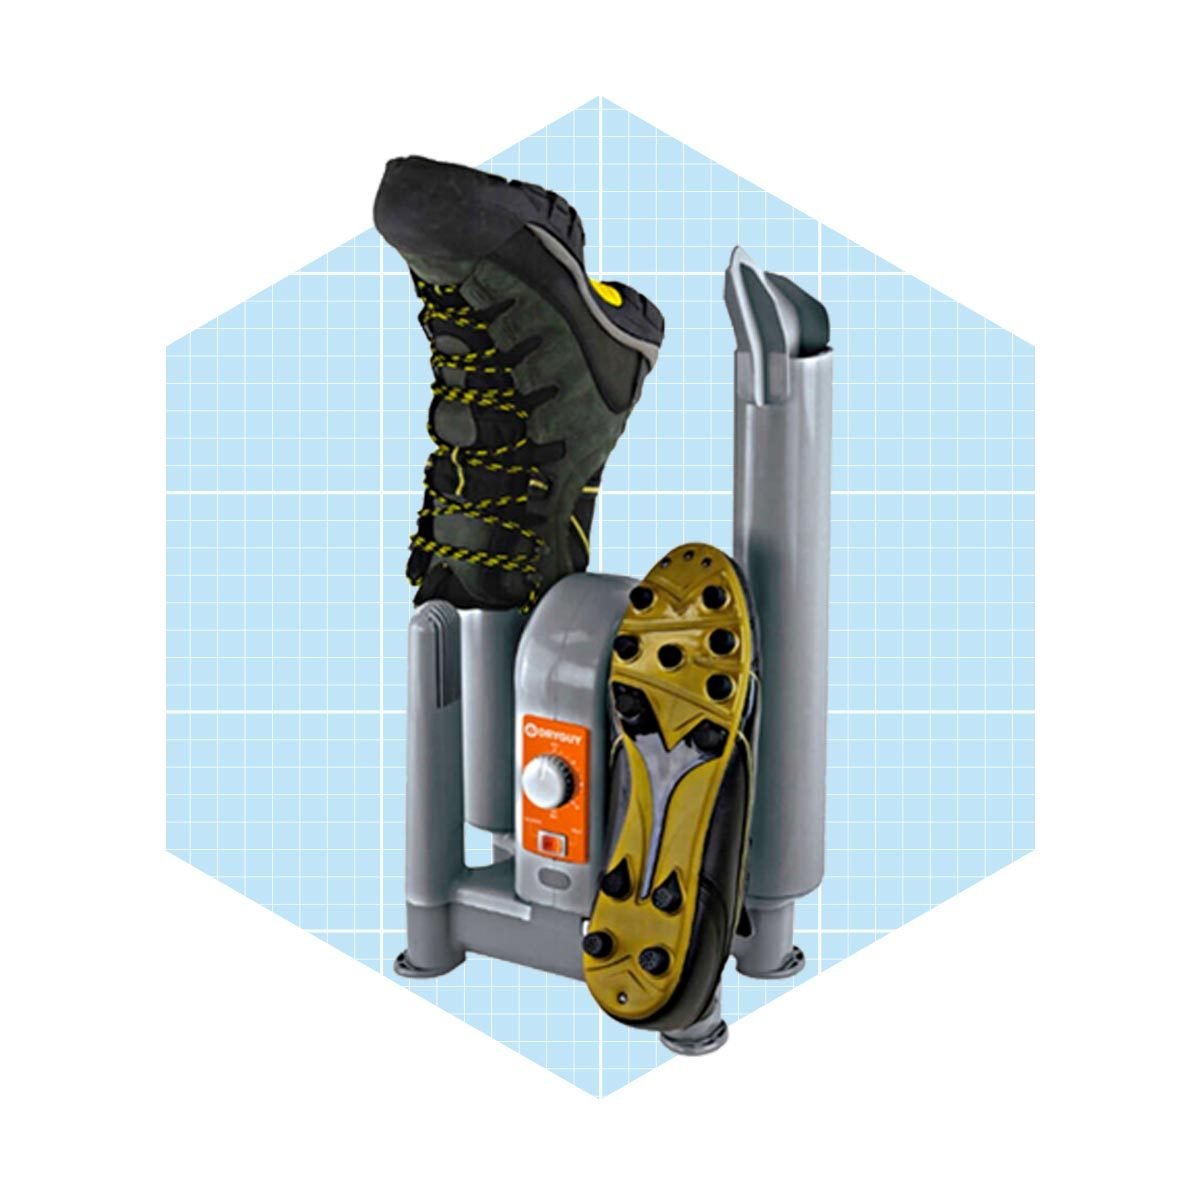 Warm Boots, Happy Feet: Introducing the DryGuy Boot Dryer